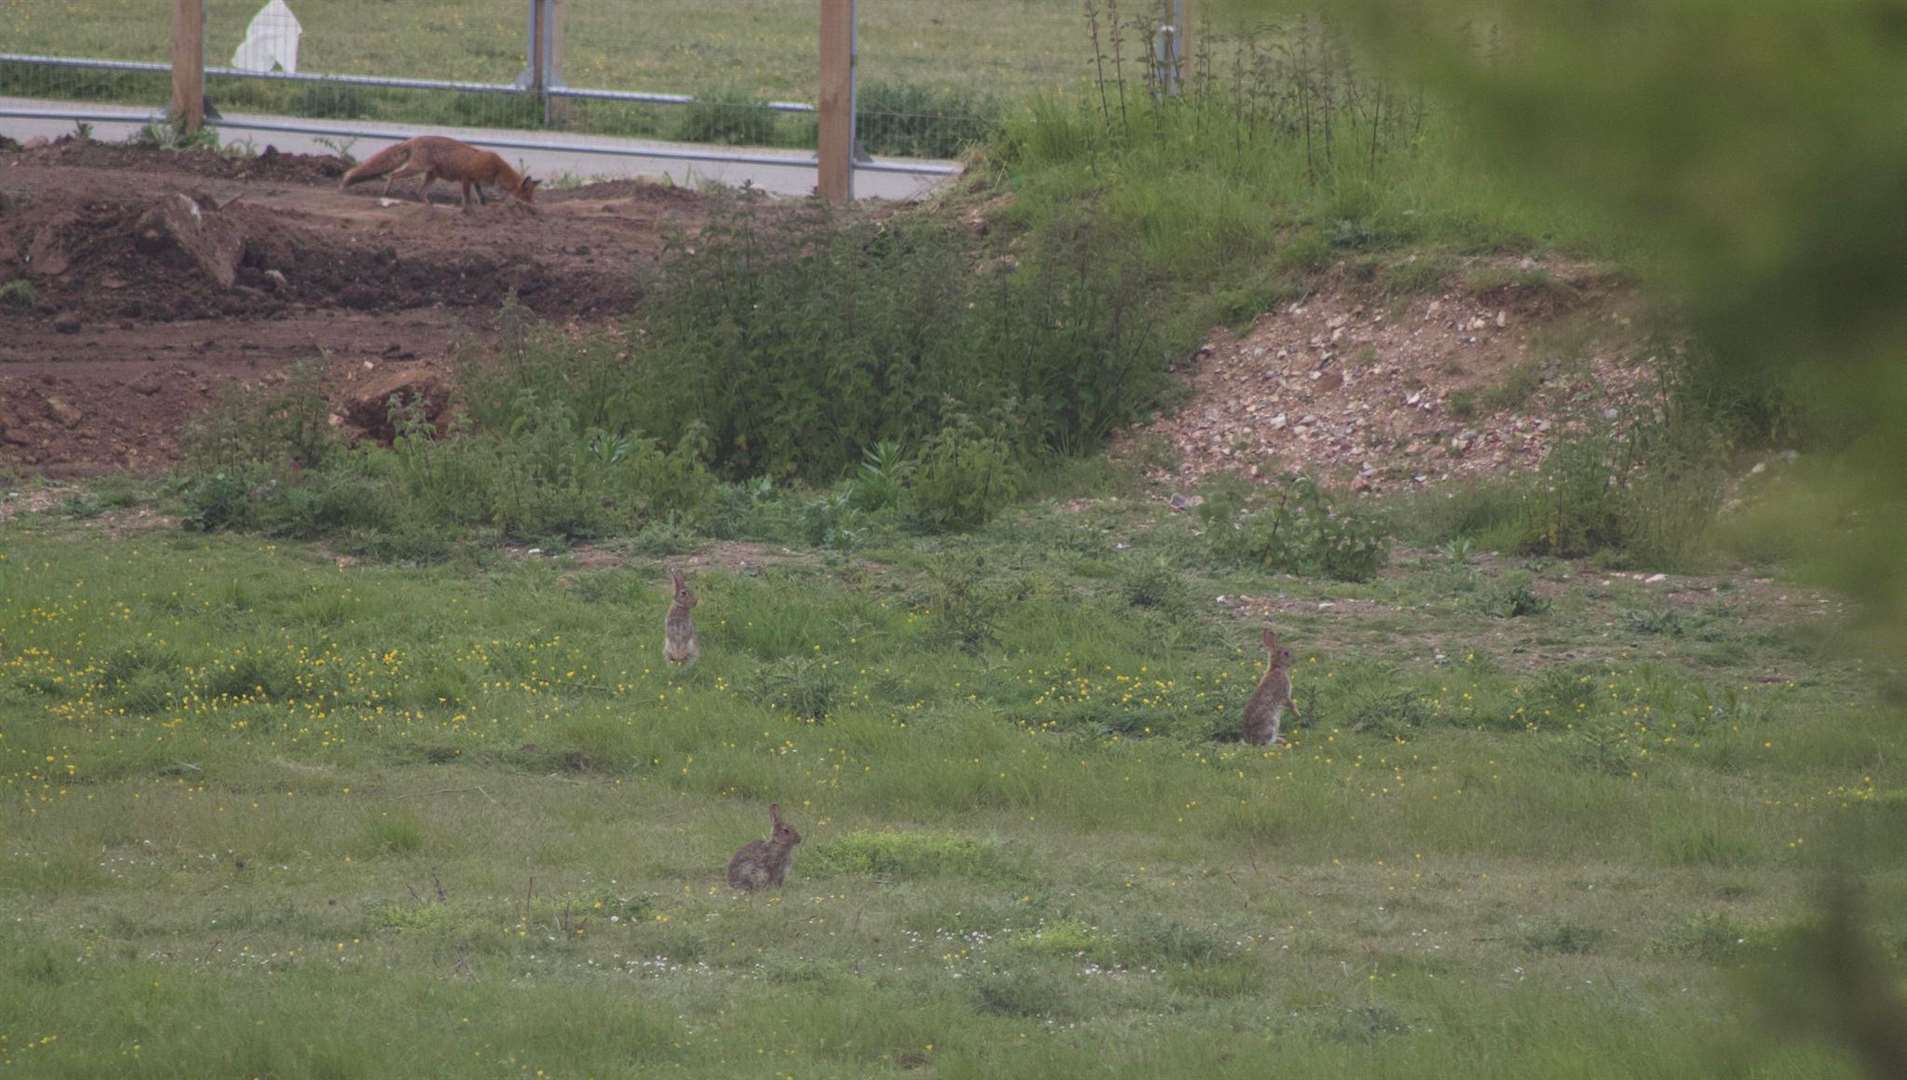 Rabbit in the field where the work is taking place. Picture: Kim Ready